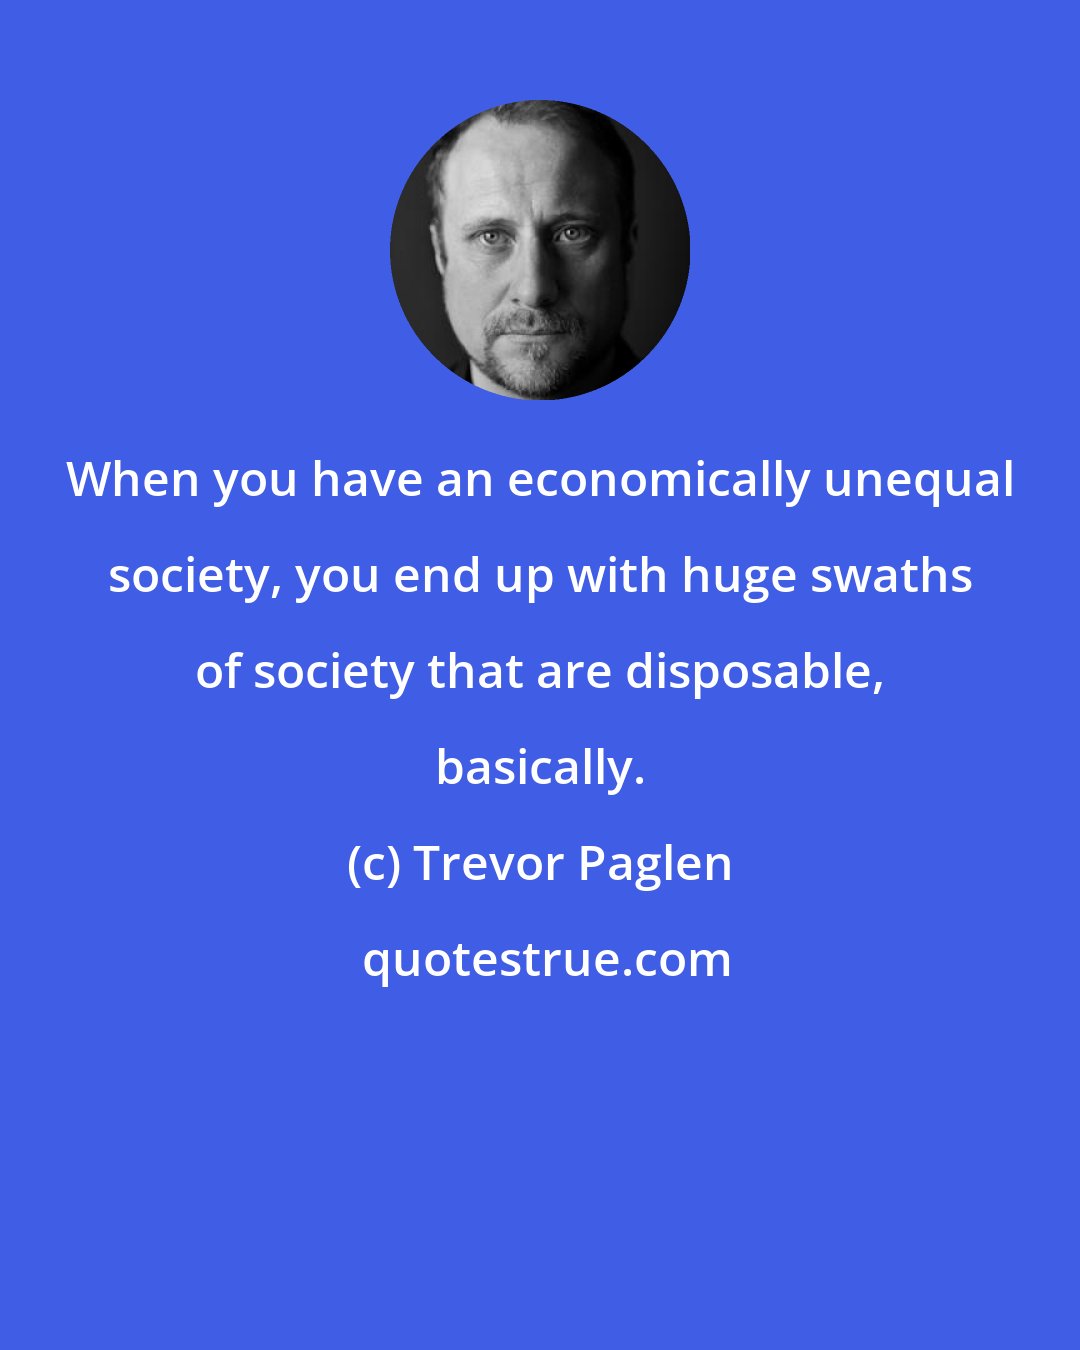 Trevor Paglen: When you have an economically unequal society, you end up with huge swaths of society that are disposable, basically.